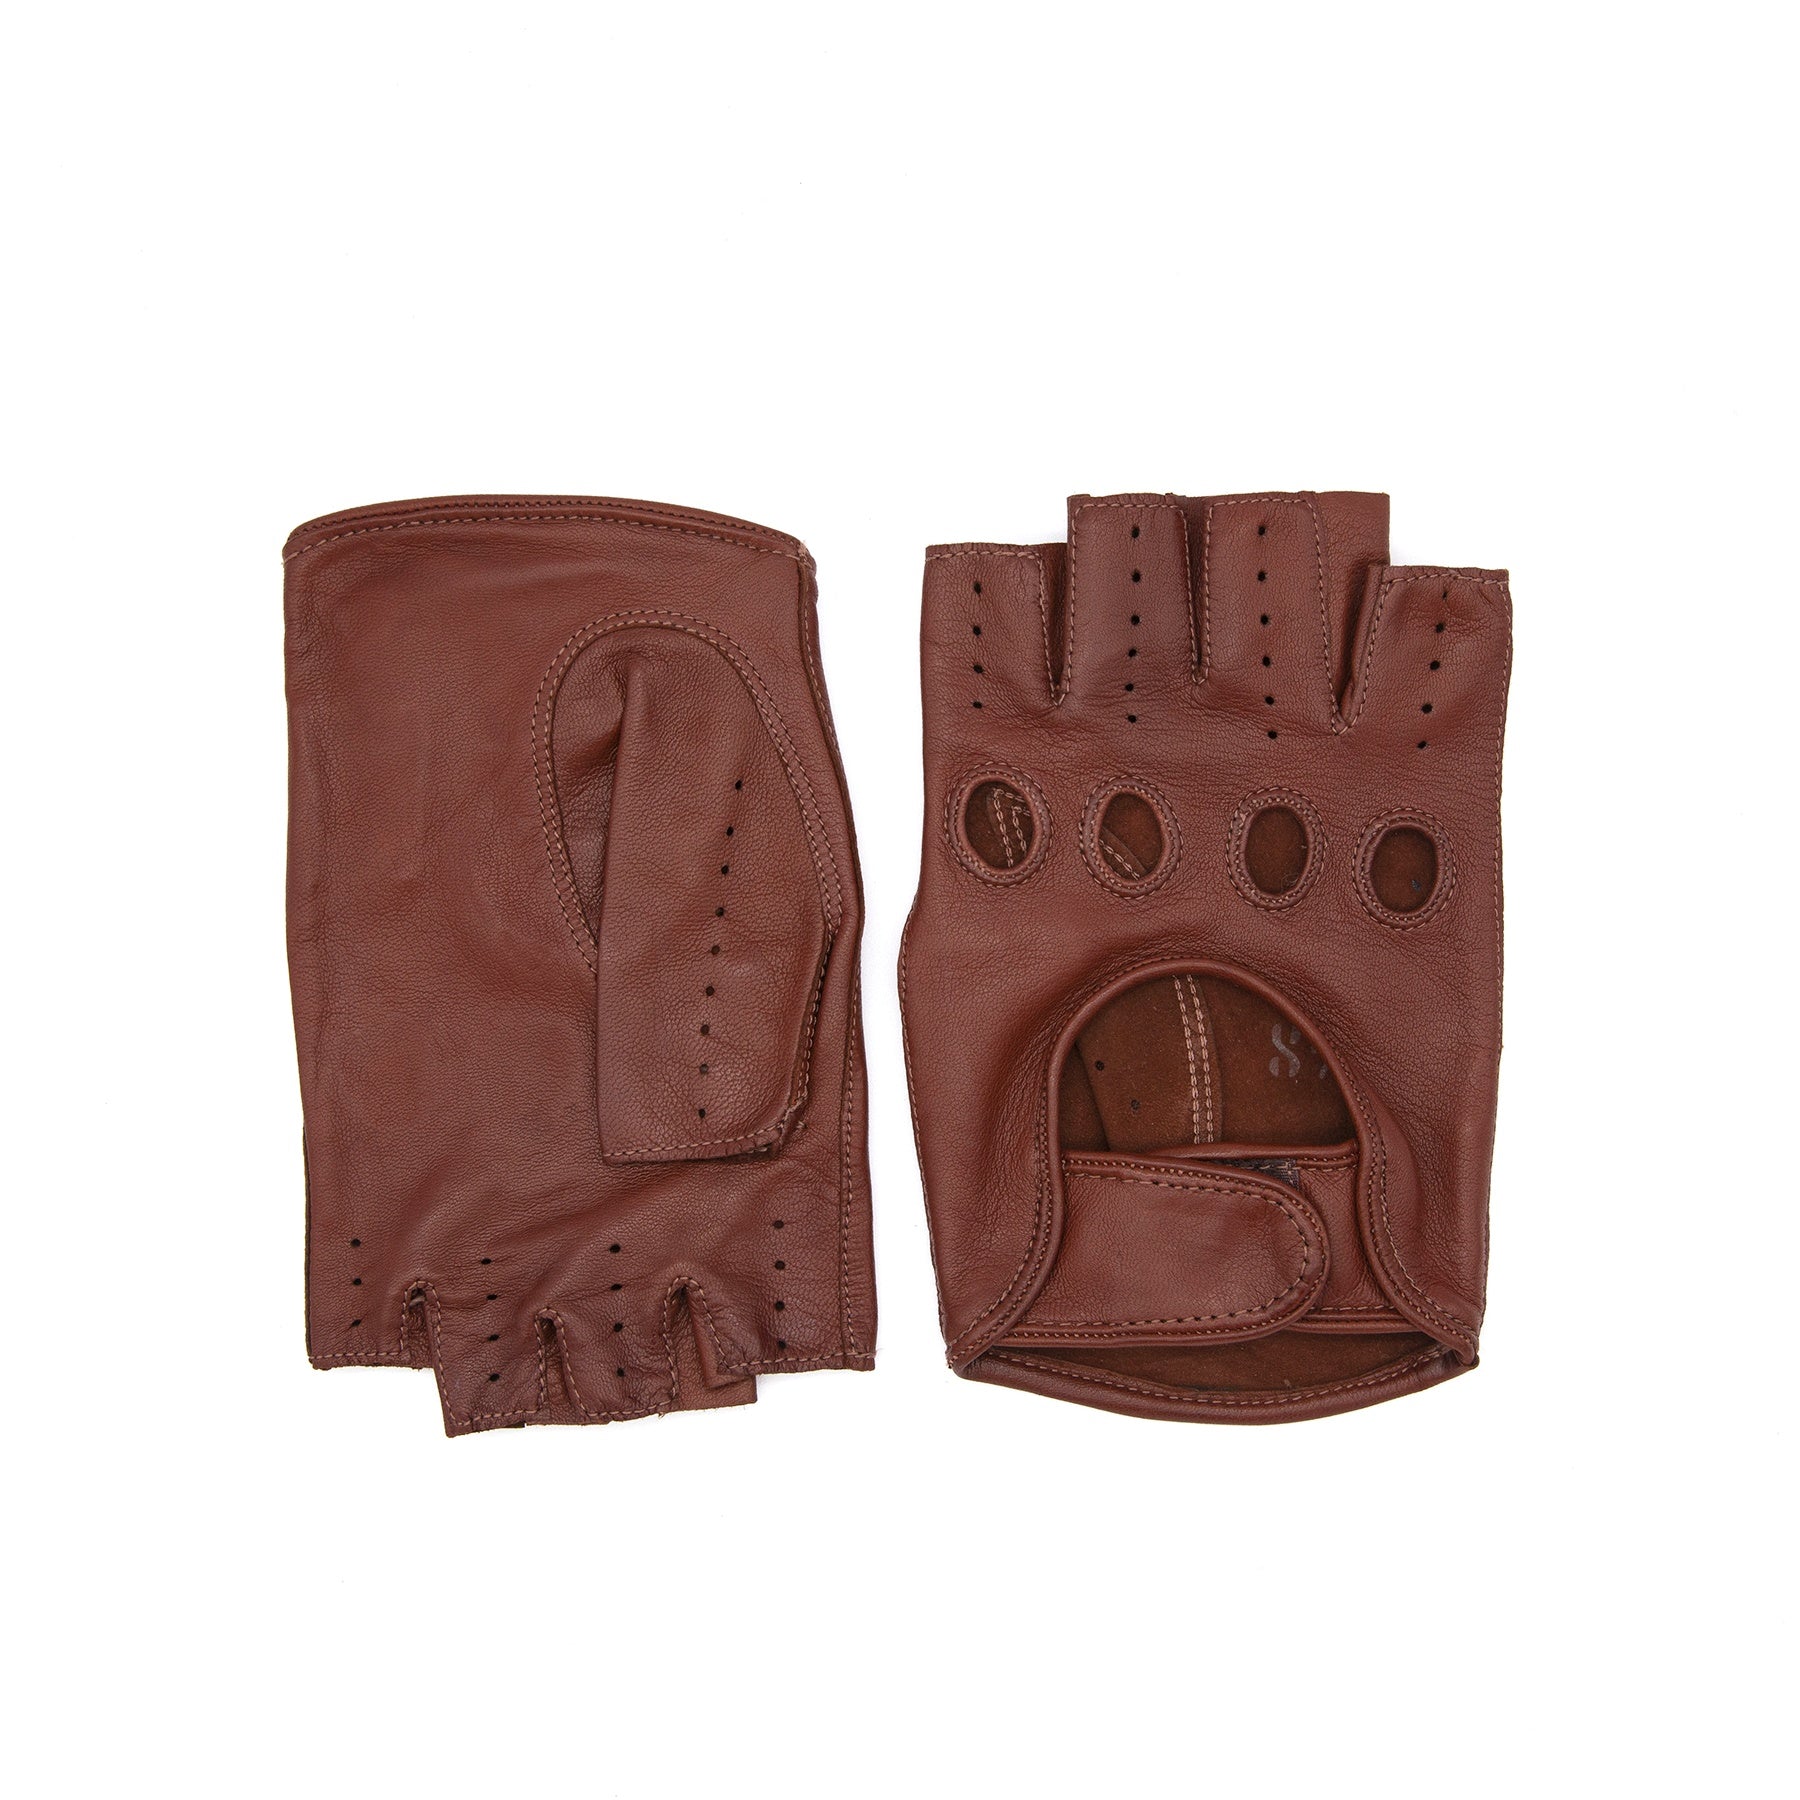 Men's cognac leather half fingers driving gloves with strap closure